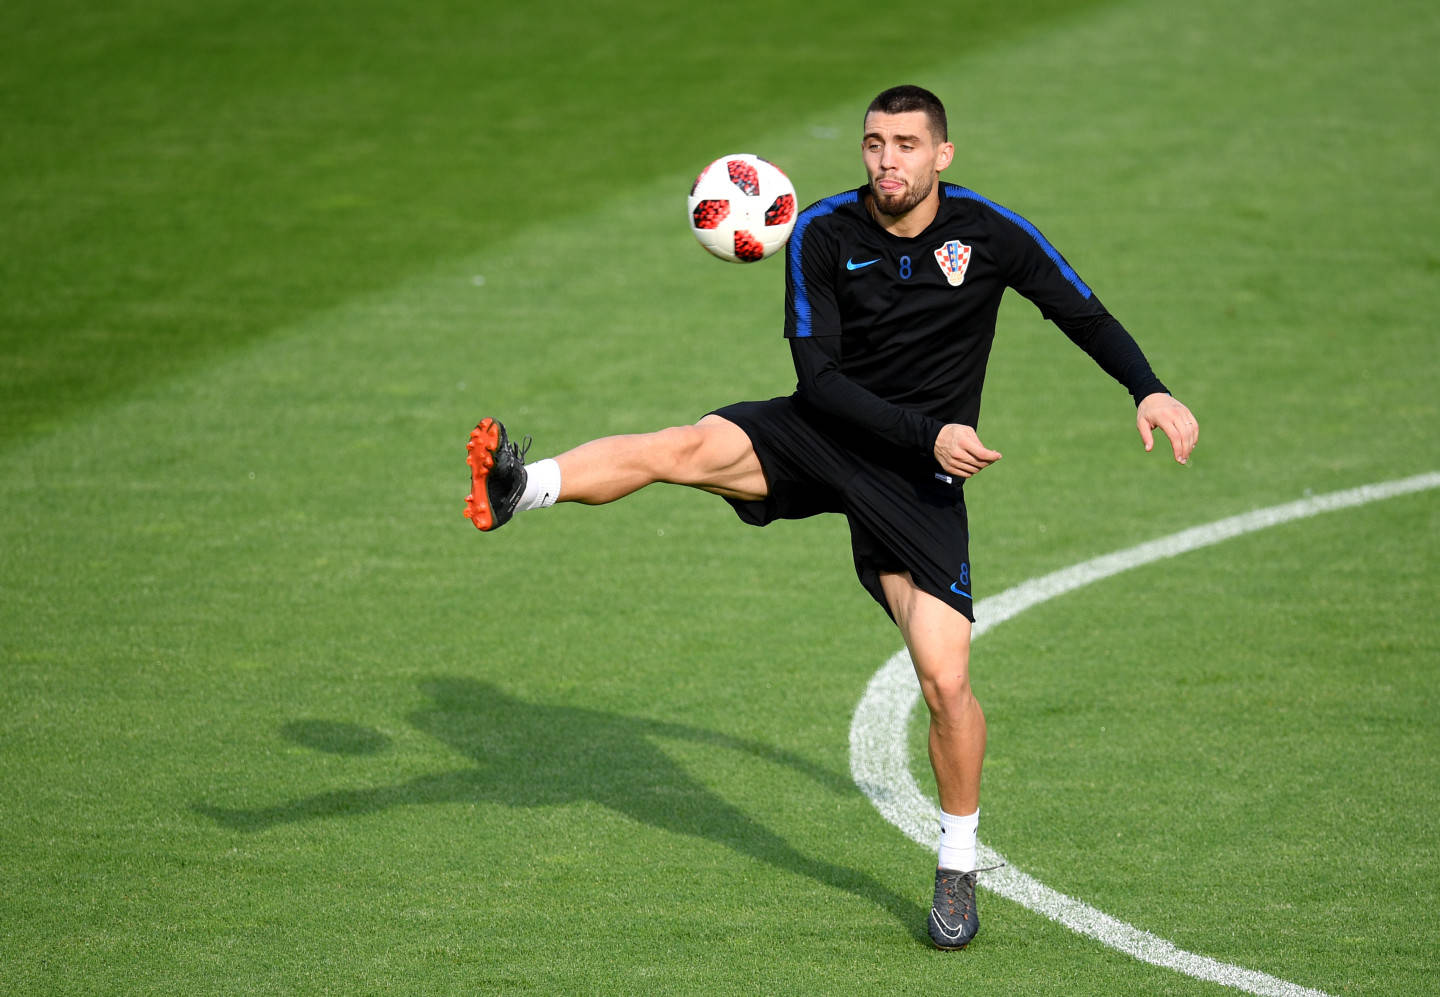 Mateokovacic Fångar En Boll. (this Sentence Could Be Used As A Caption For A Computer Or Mobile Wallpaper Featuring An Image Of Mateo Kovacic Catching A Ball.) Wallpaper